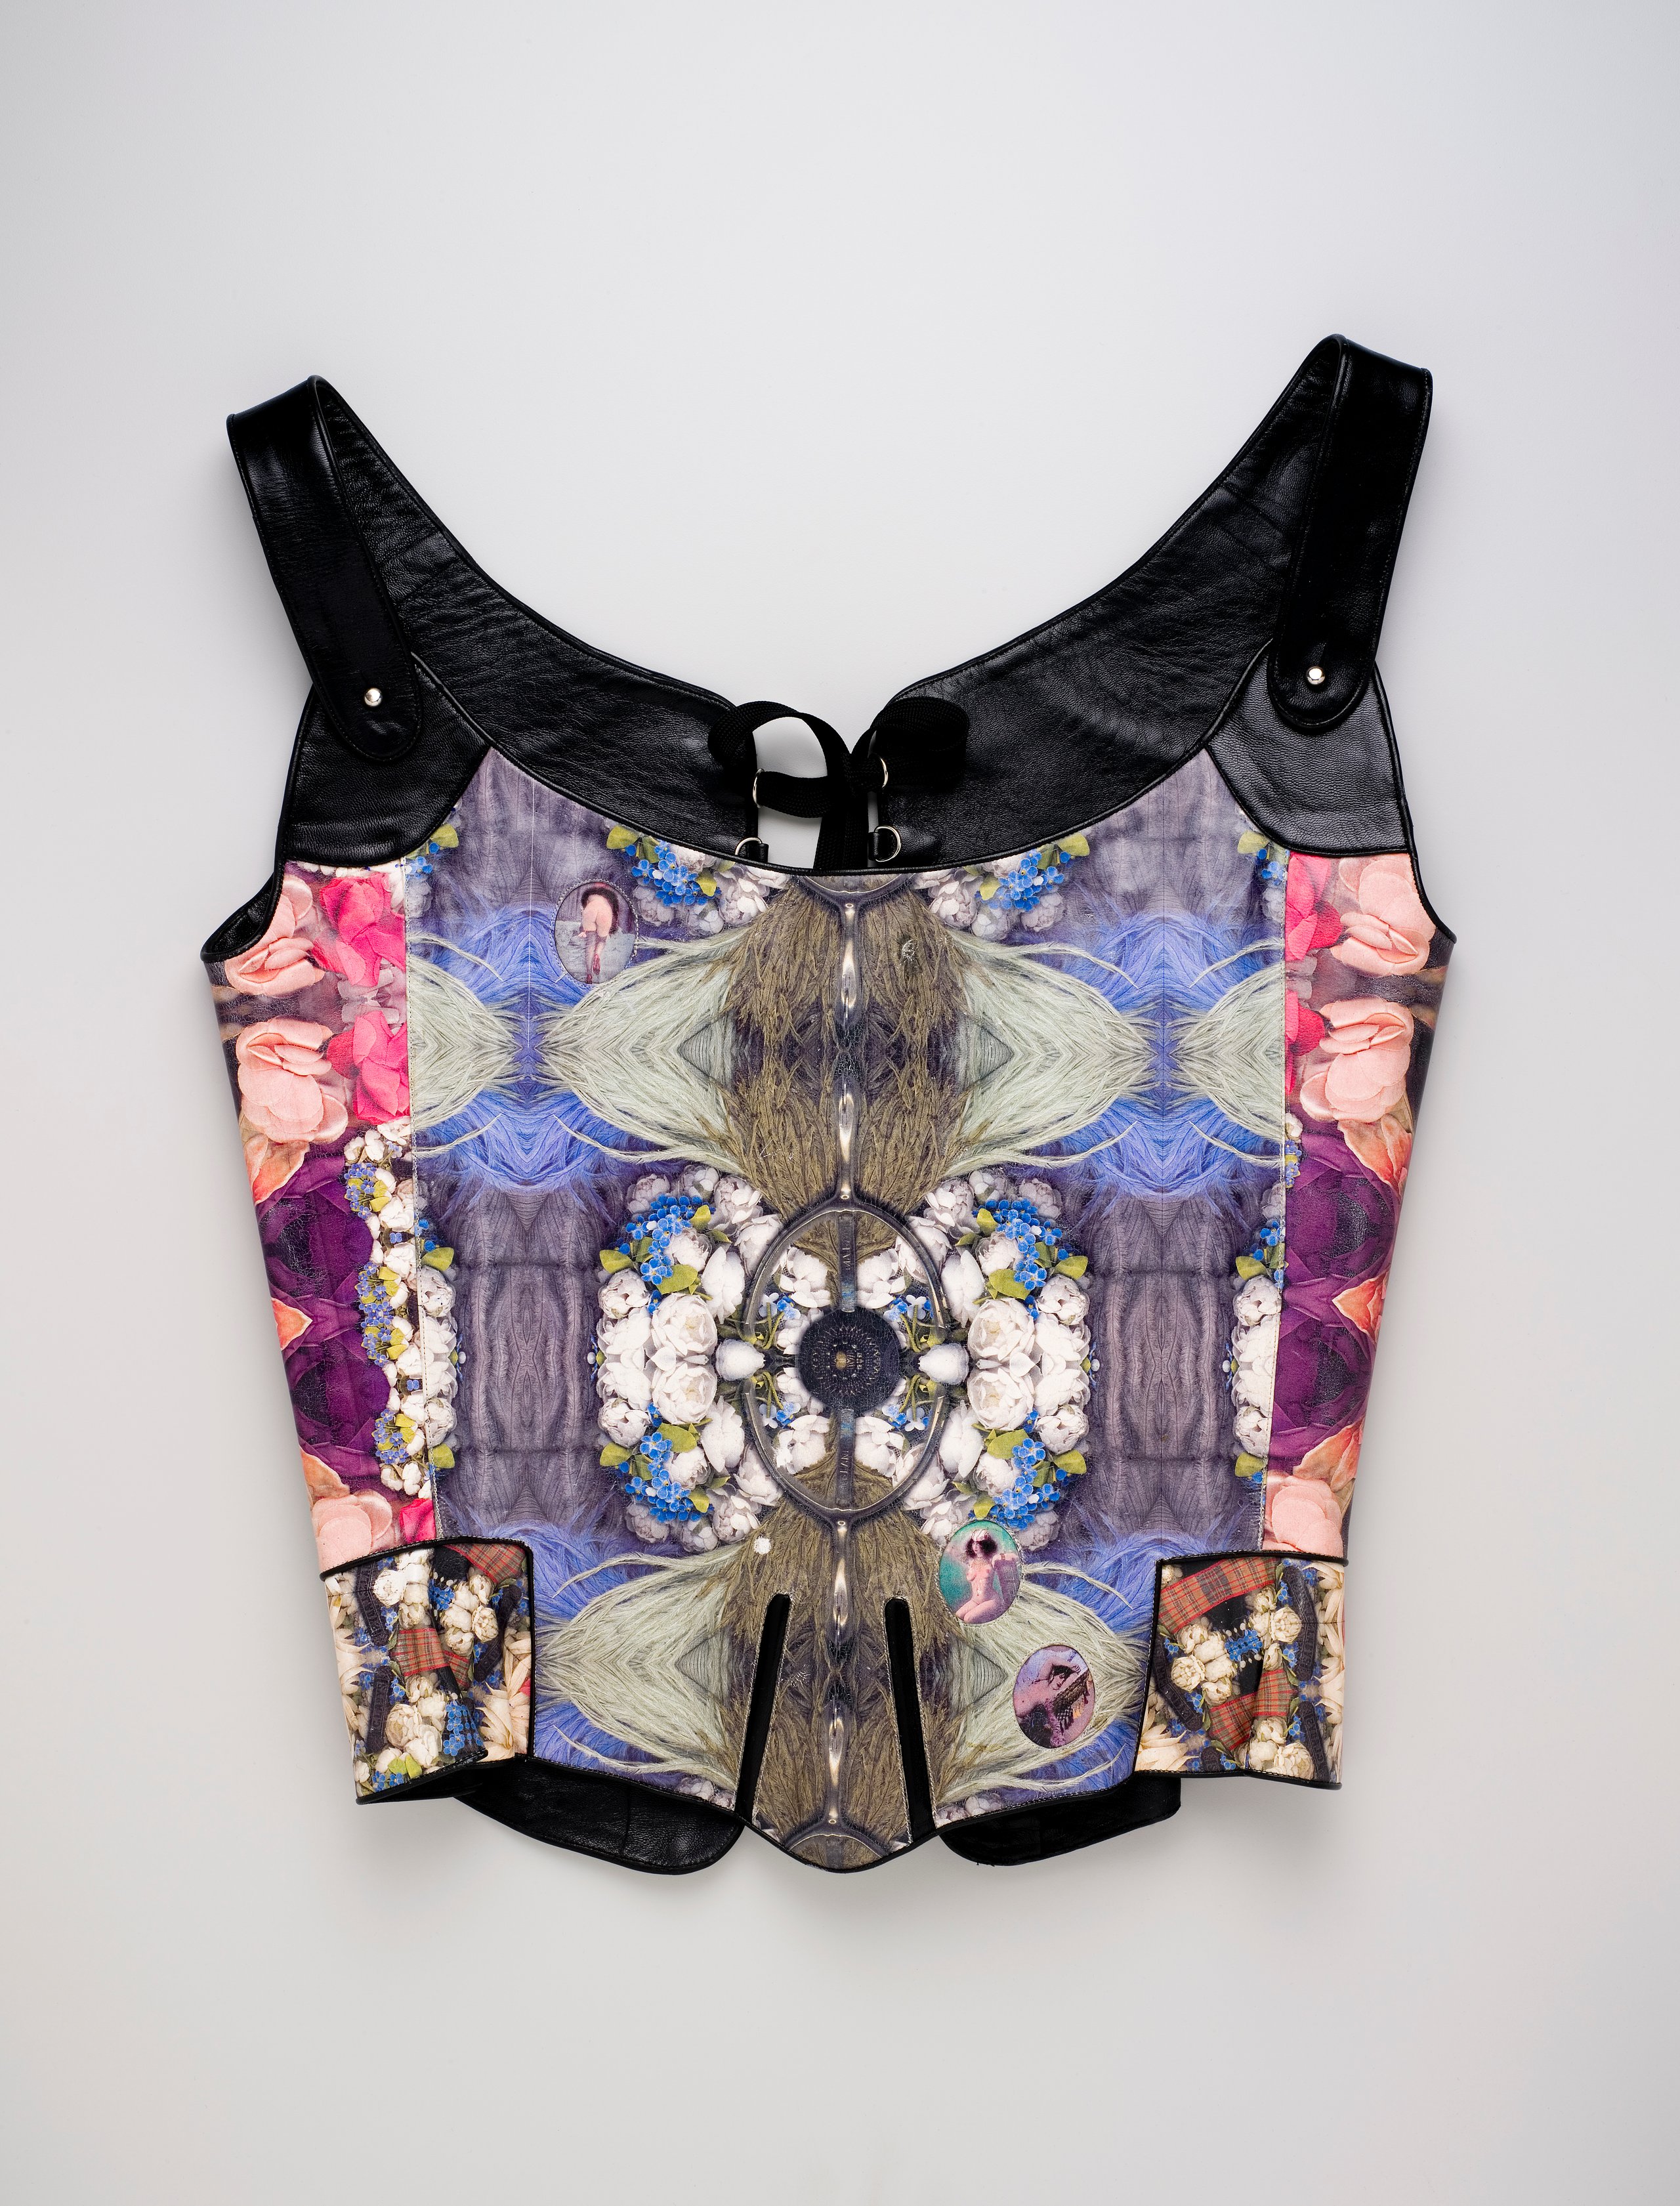 Corset designed by Donna-May Bolinger